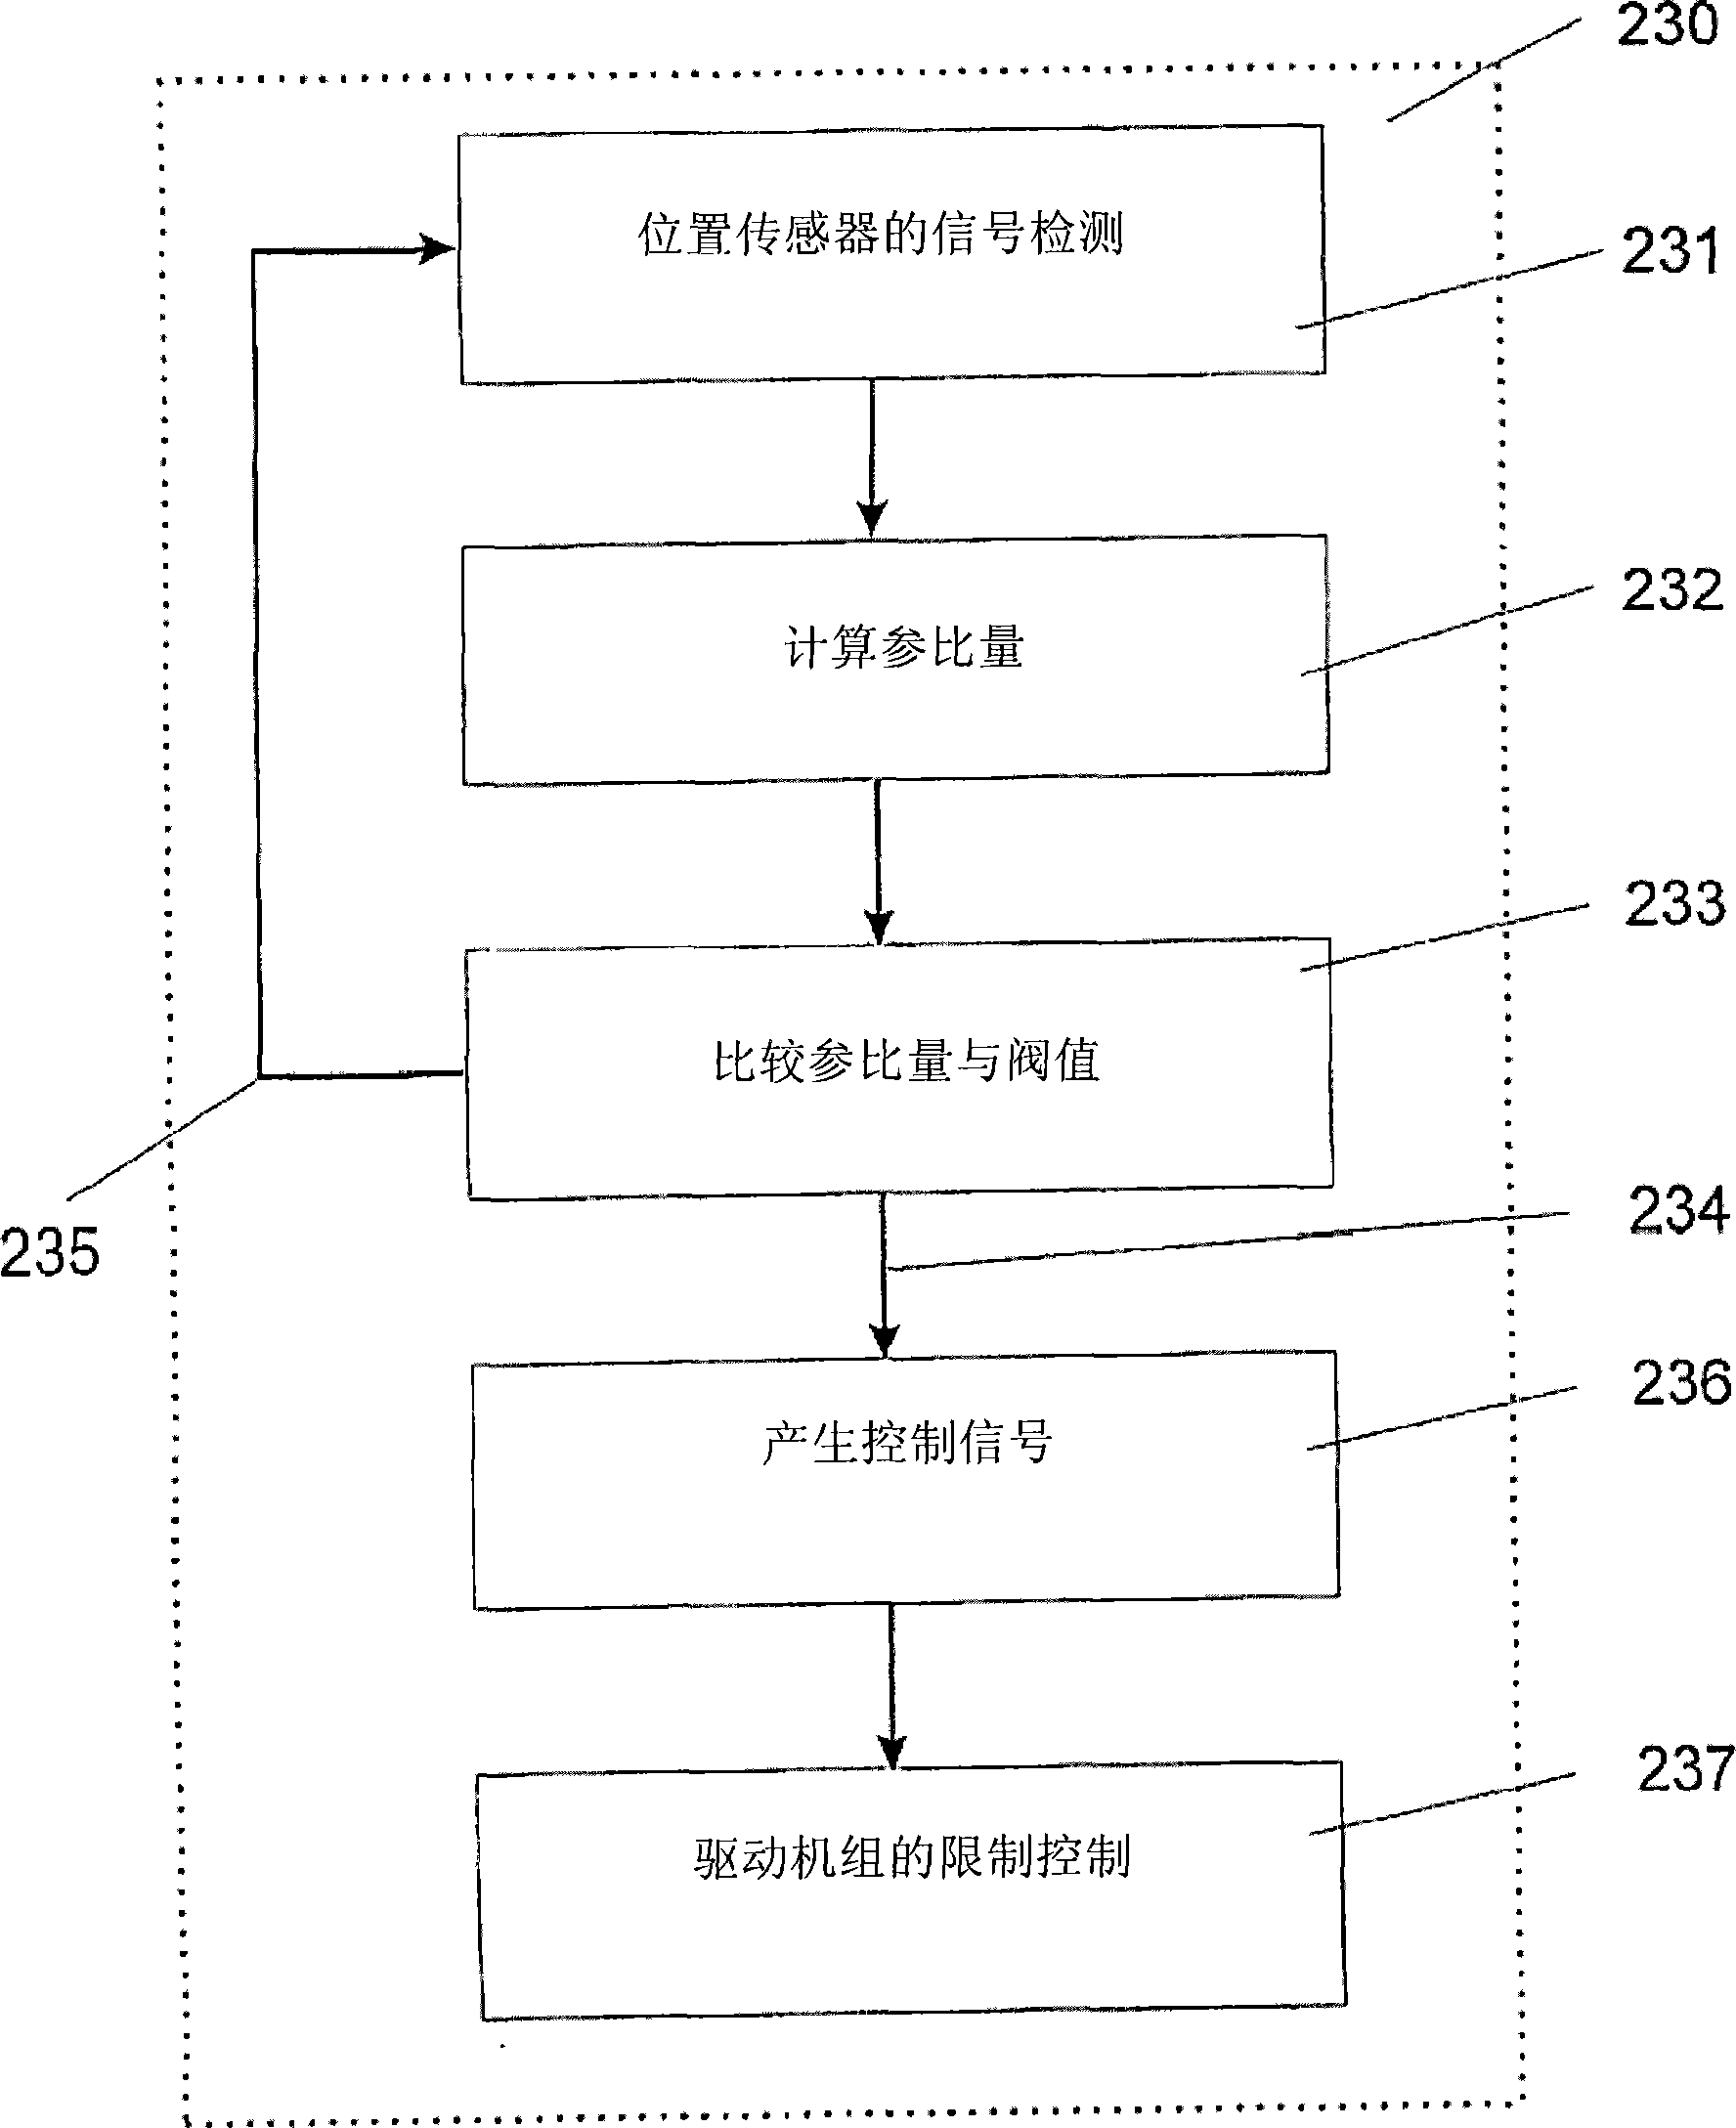 Method for load limitation in drive systems for a high lift system for aeroplanes